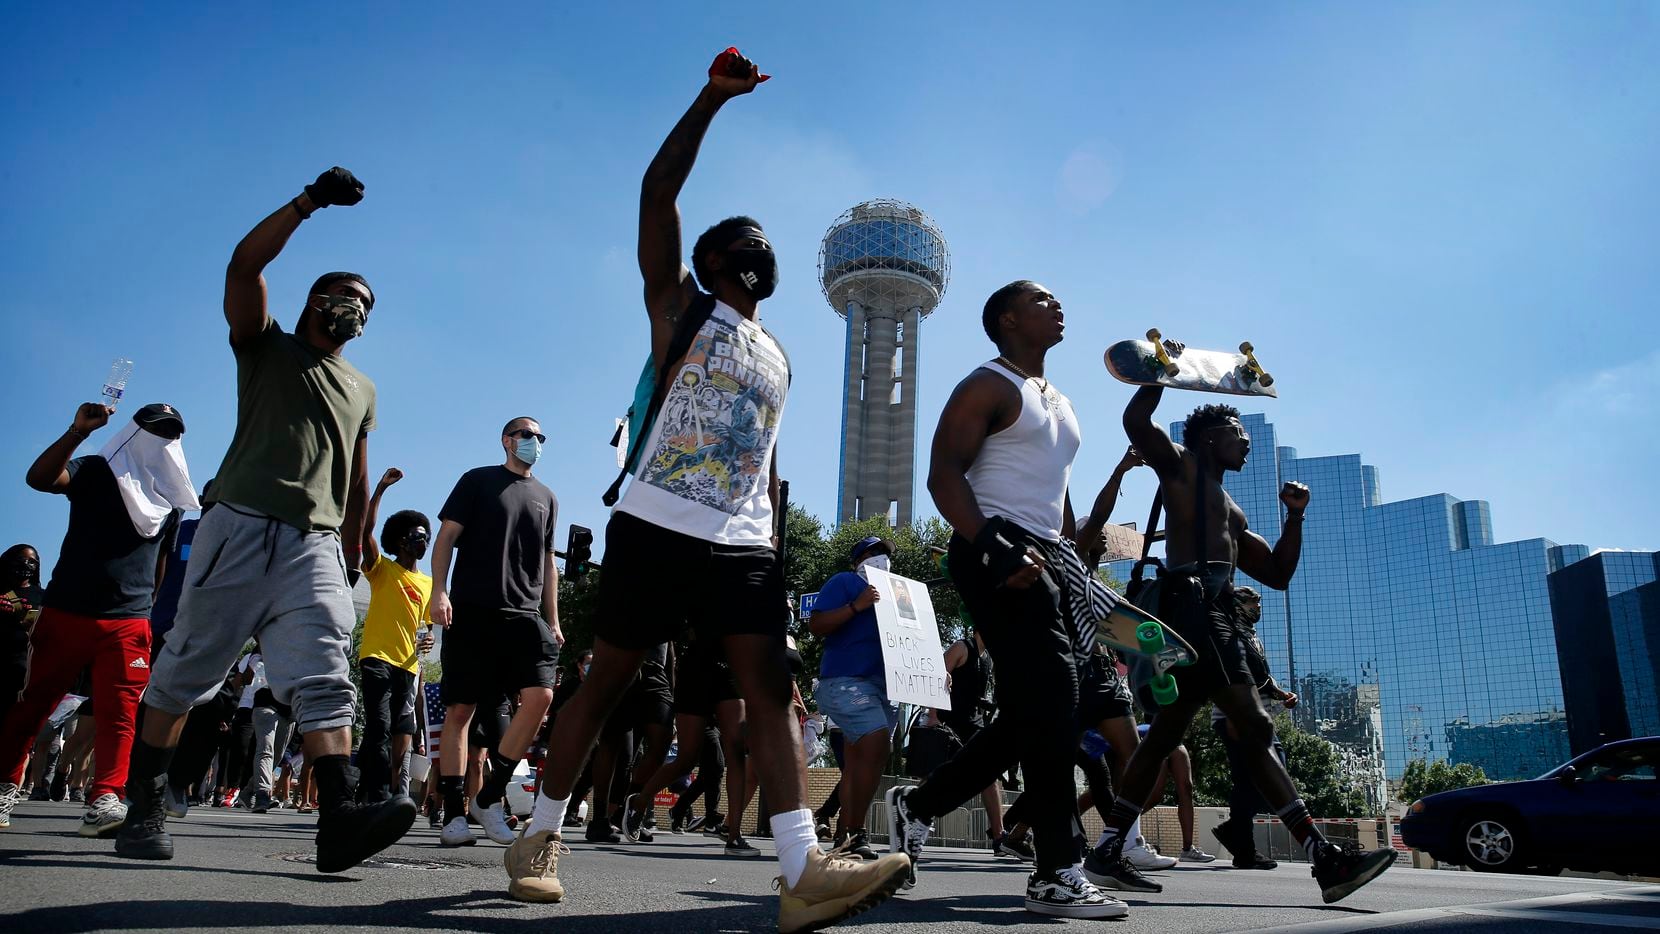 Protesters supporting Black Lives Matters rally march past Reunion Tower on their way to Dealey Plaza after a rally at Dallas City Hall earlier this month.